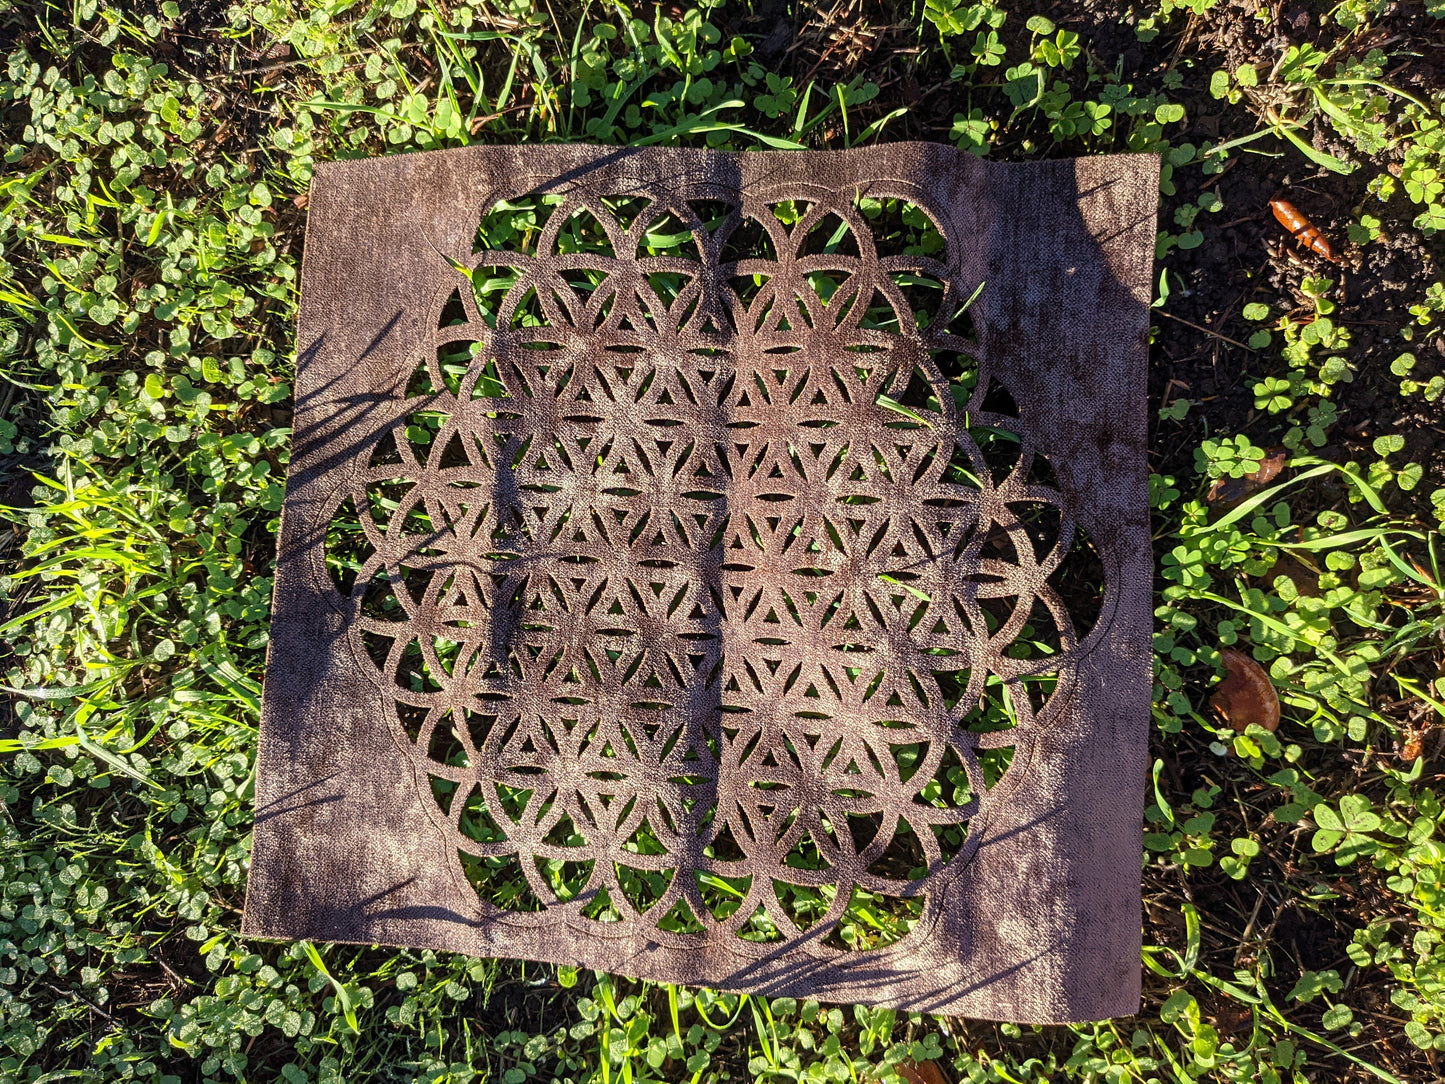 Flower Of Life Altar Cloth or Wall-Hanging in LaserCut Upcycled Earthy Upholstery Fabric - Sacred Geometry Crystal Grid